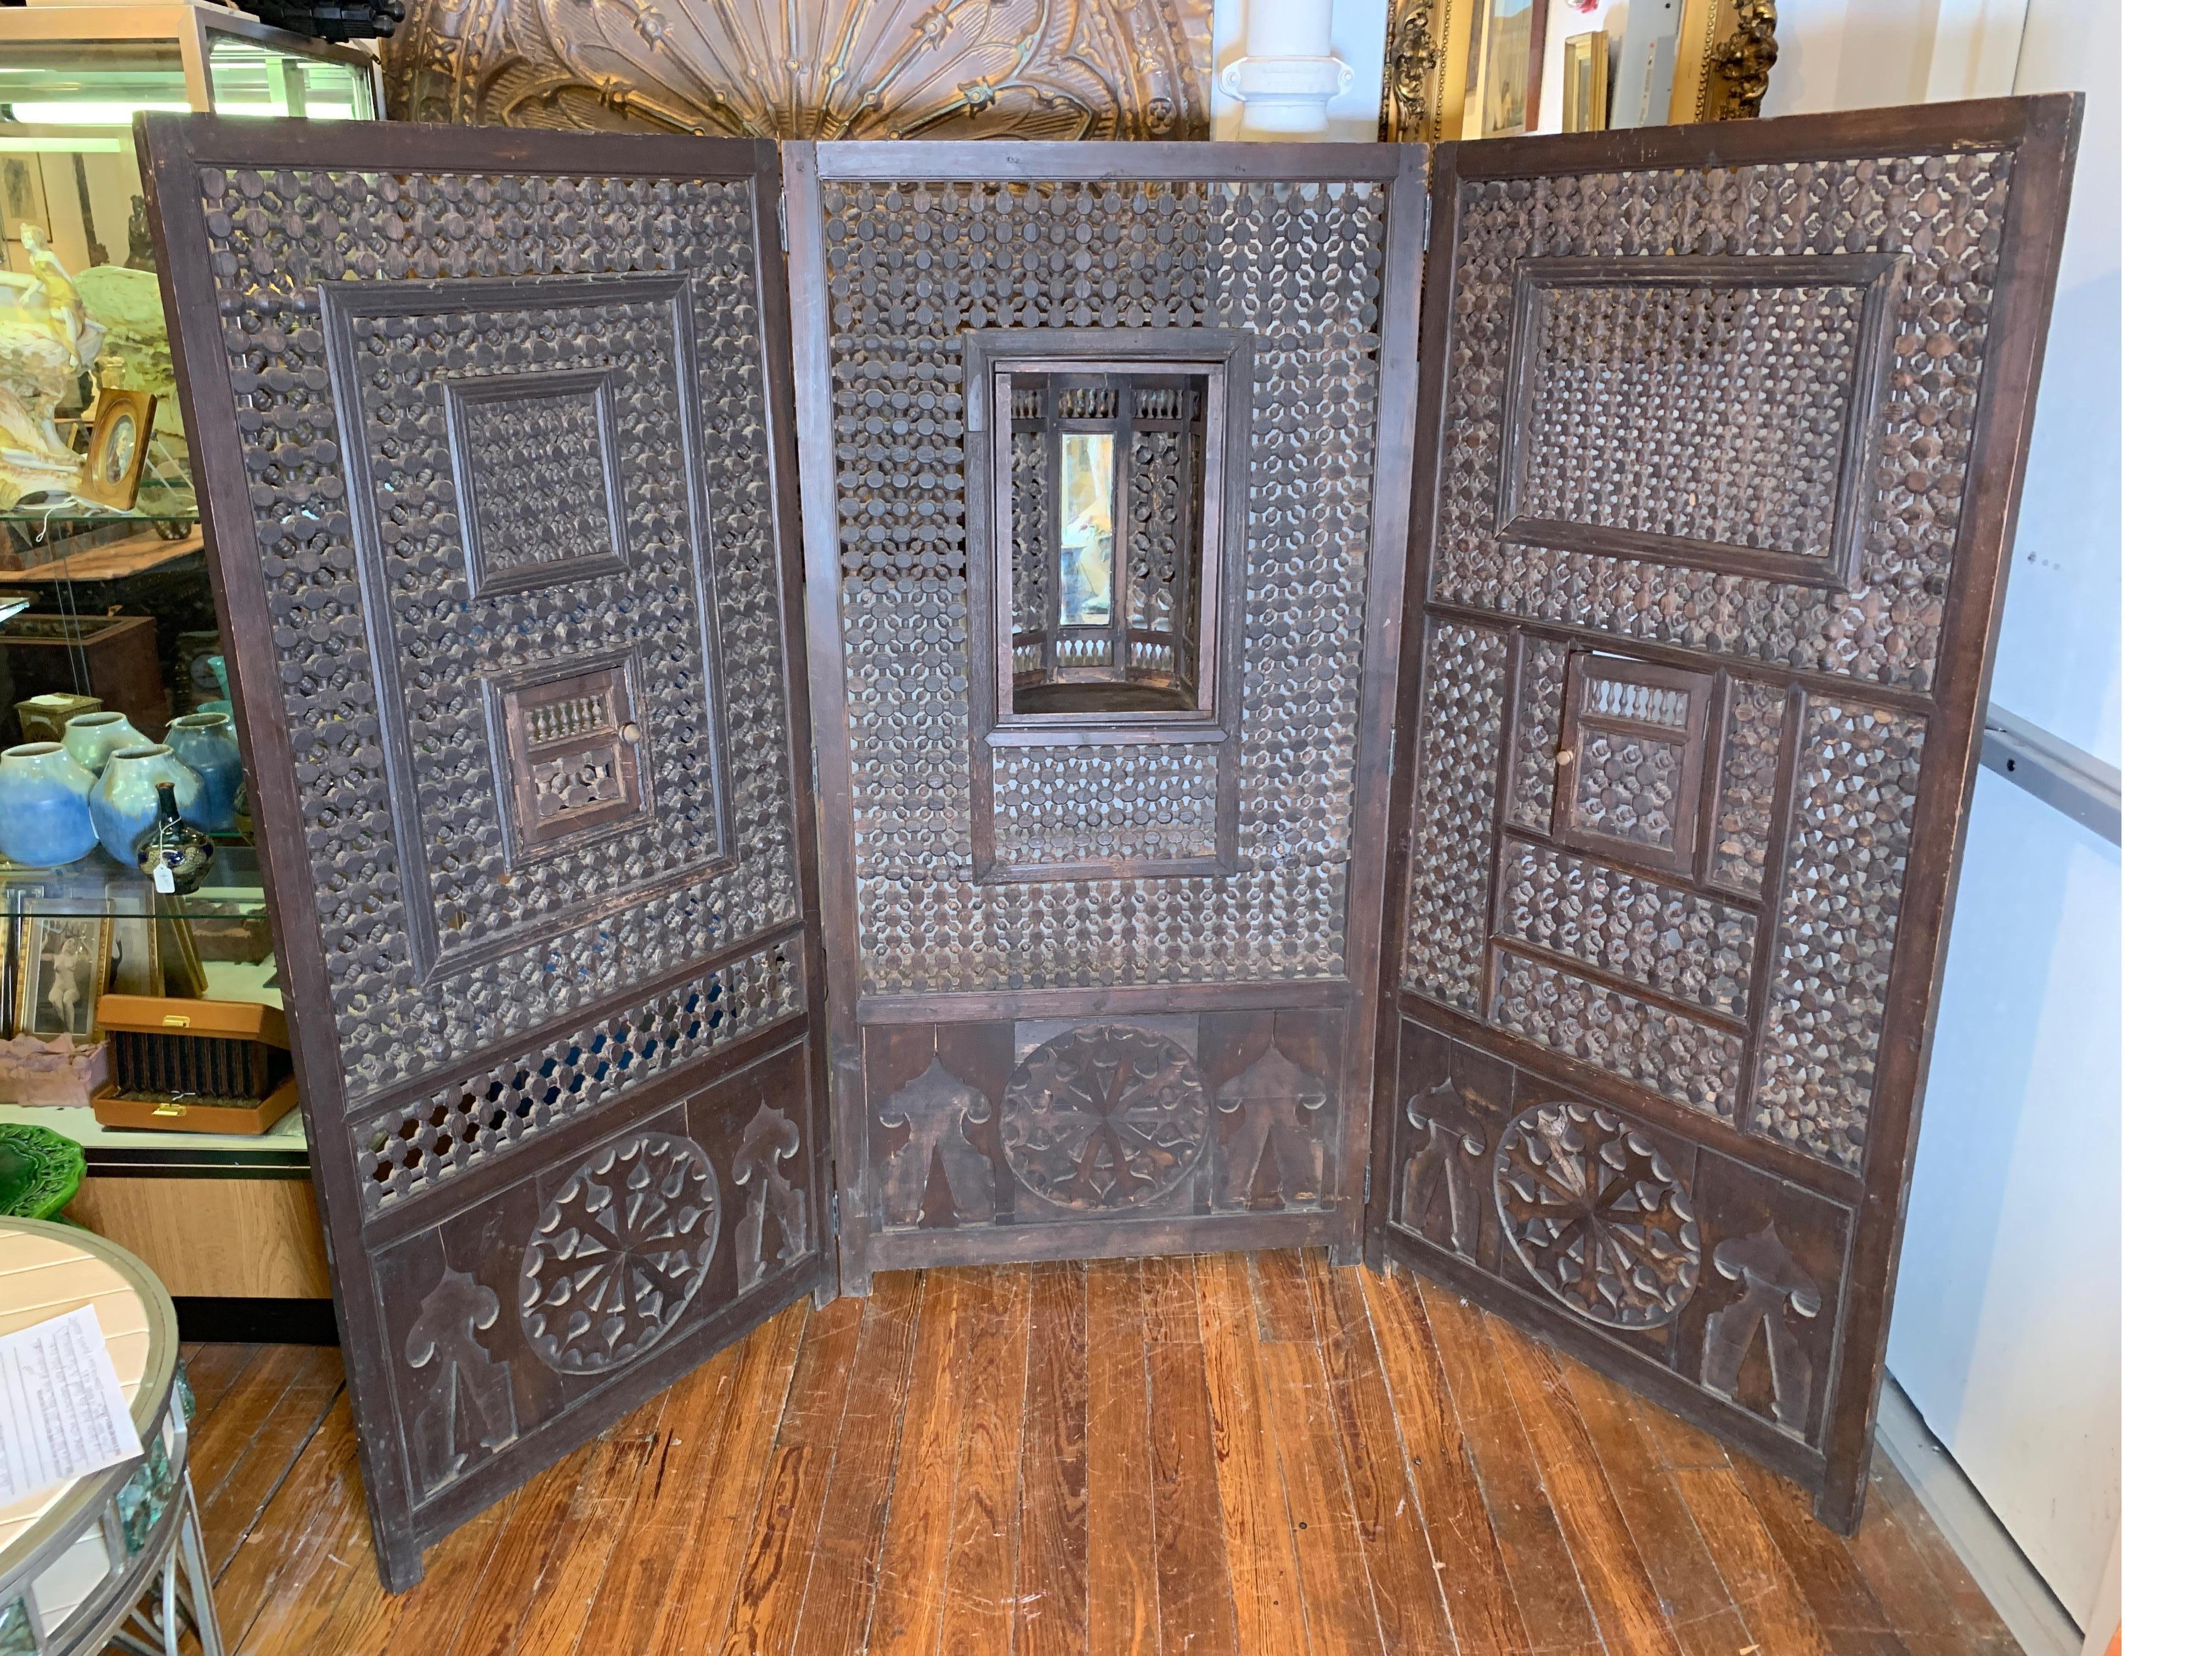 Rare original 19th century Middle Eastern harem door panels - one with an alcove in the center with added mirror, all interconnected with pegged framework - no glue, nails, or screws. Pins in hinges, easy to separate. Dimensions: open: 67